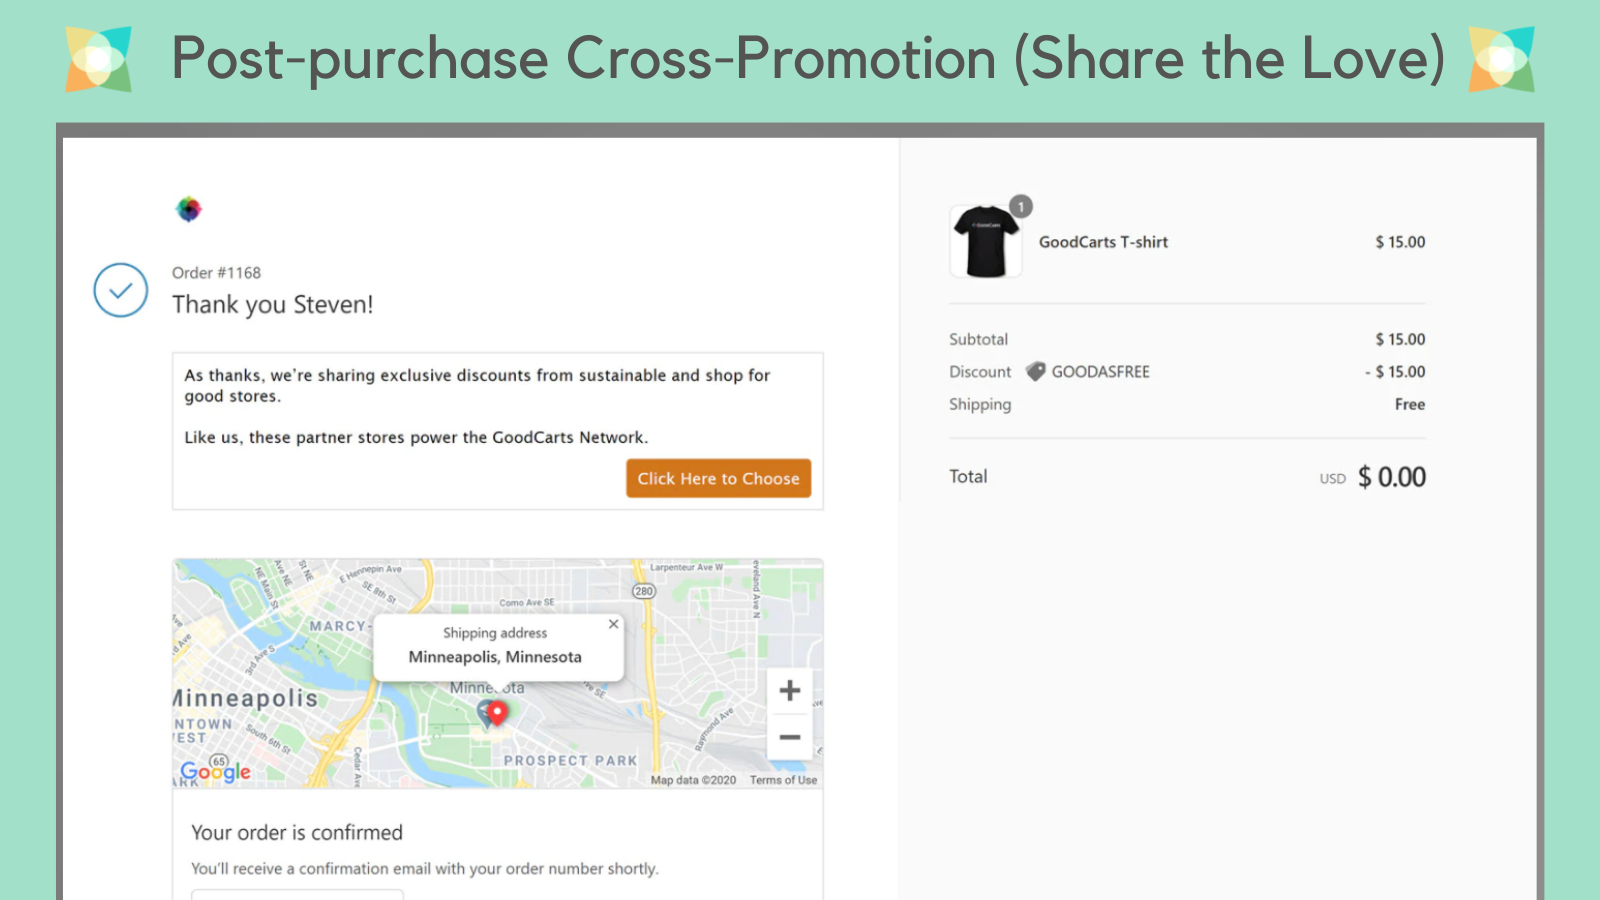 Customers opt-in to view discounts with high CTR.